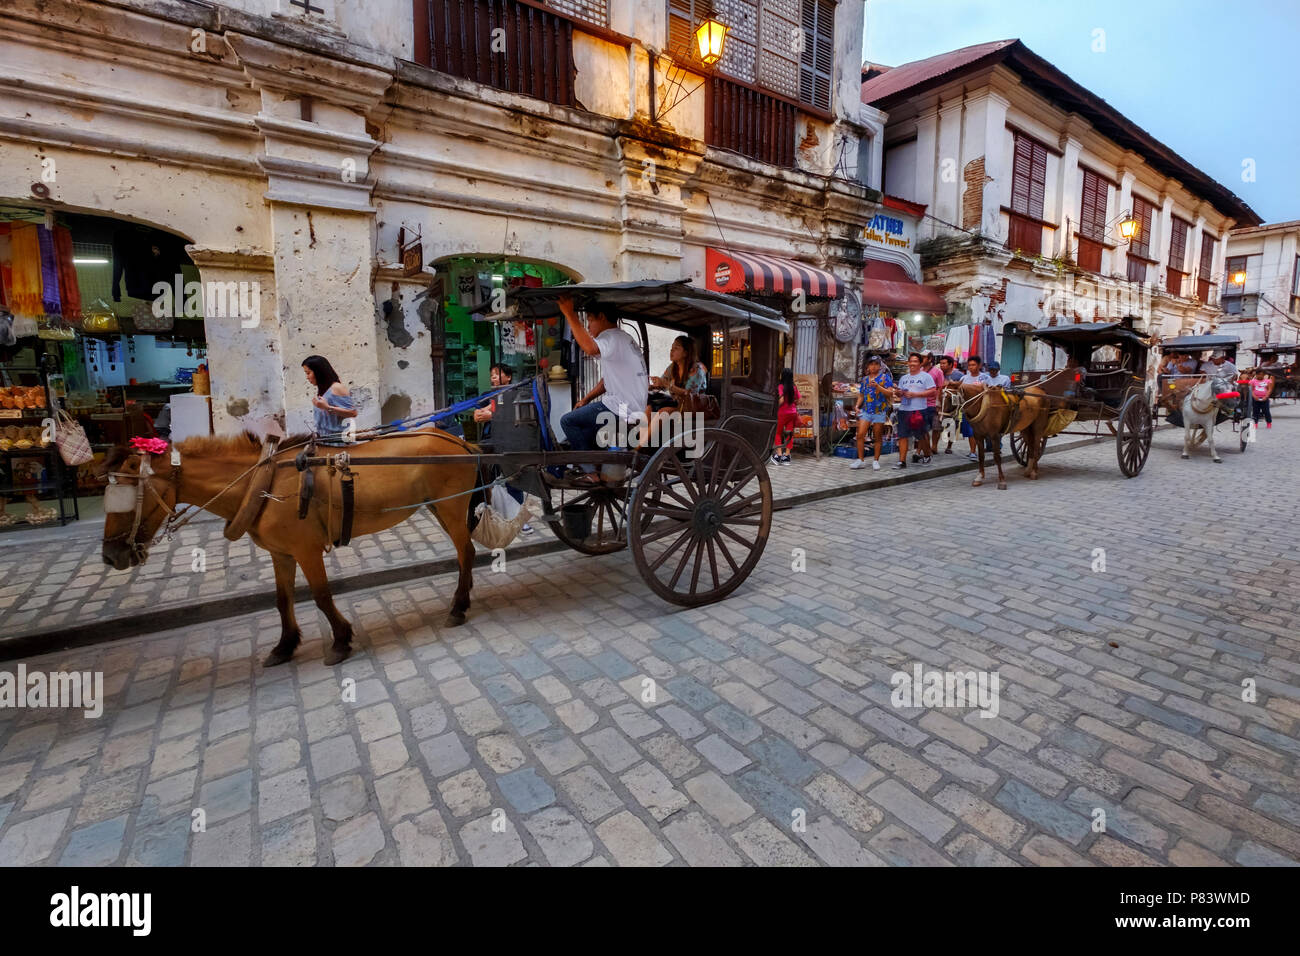 The picturesque 16th century Spanish colonial town of Vigan in the Philippines with its horse-drawn carriages and cobblestone streets Stock Photo